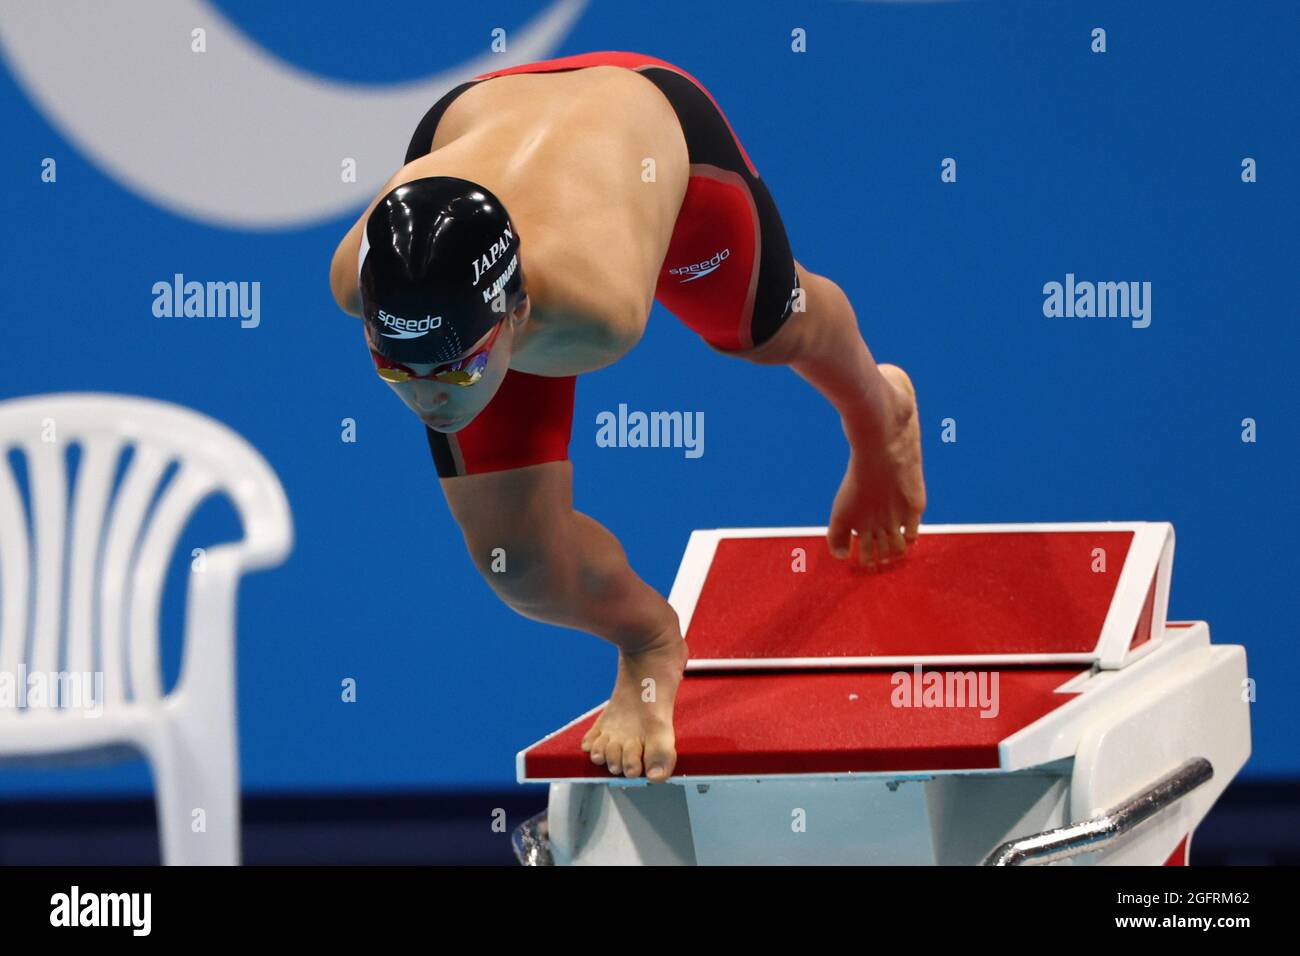 Tokyo 2020 Paralympic Games - Swimming - Men's 50m Butterfly - S5 Heat 3 – Tokyo Aquatics Centre, Tokyo, Japan - August 27, 2021. Kaede Hinata of Japan in action REUTERS/Marko Djurica Stock Photo